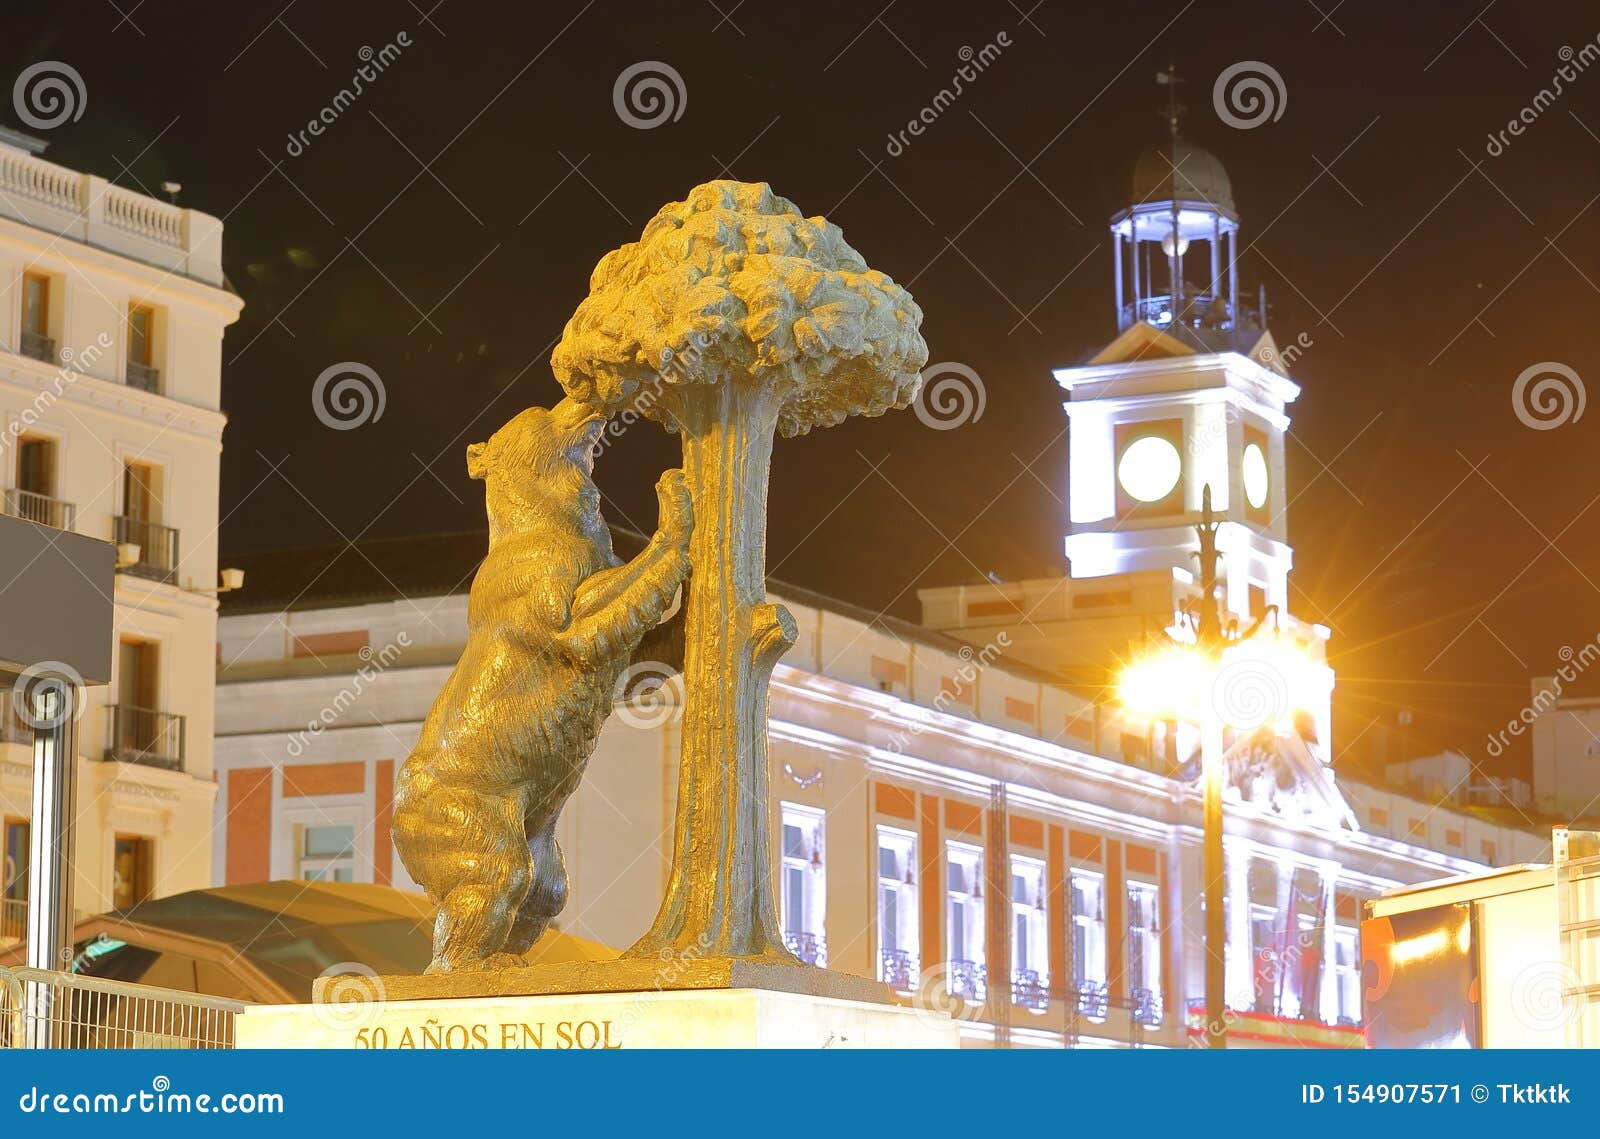 el oso y el madrono statue of the bear and the strawberry tree statue madrid spain